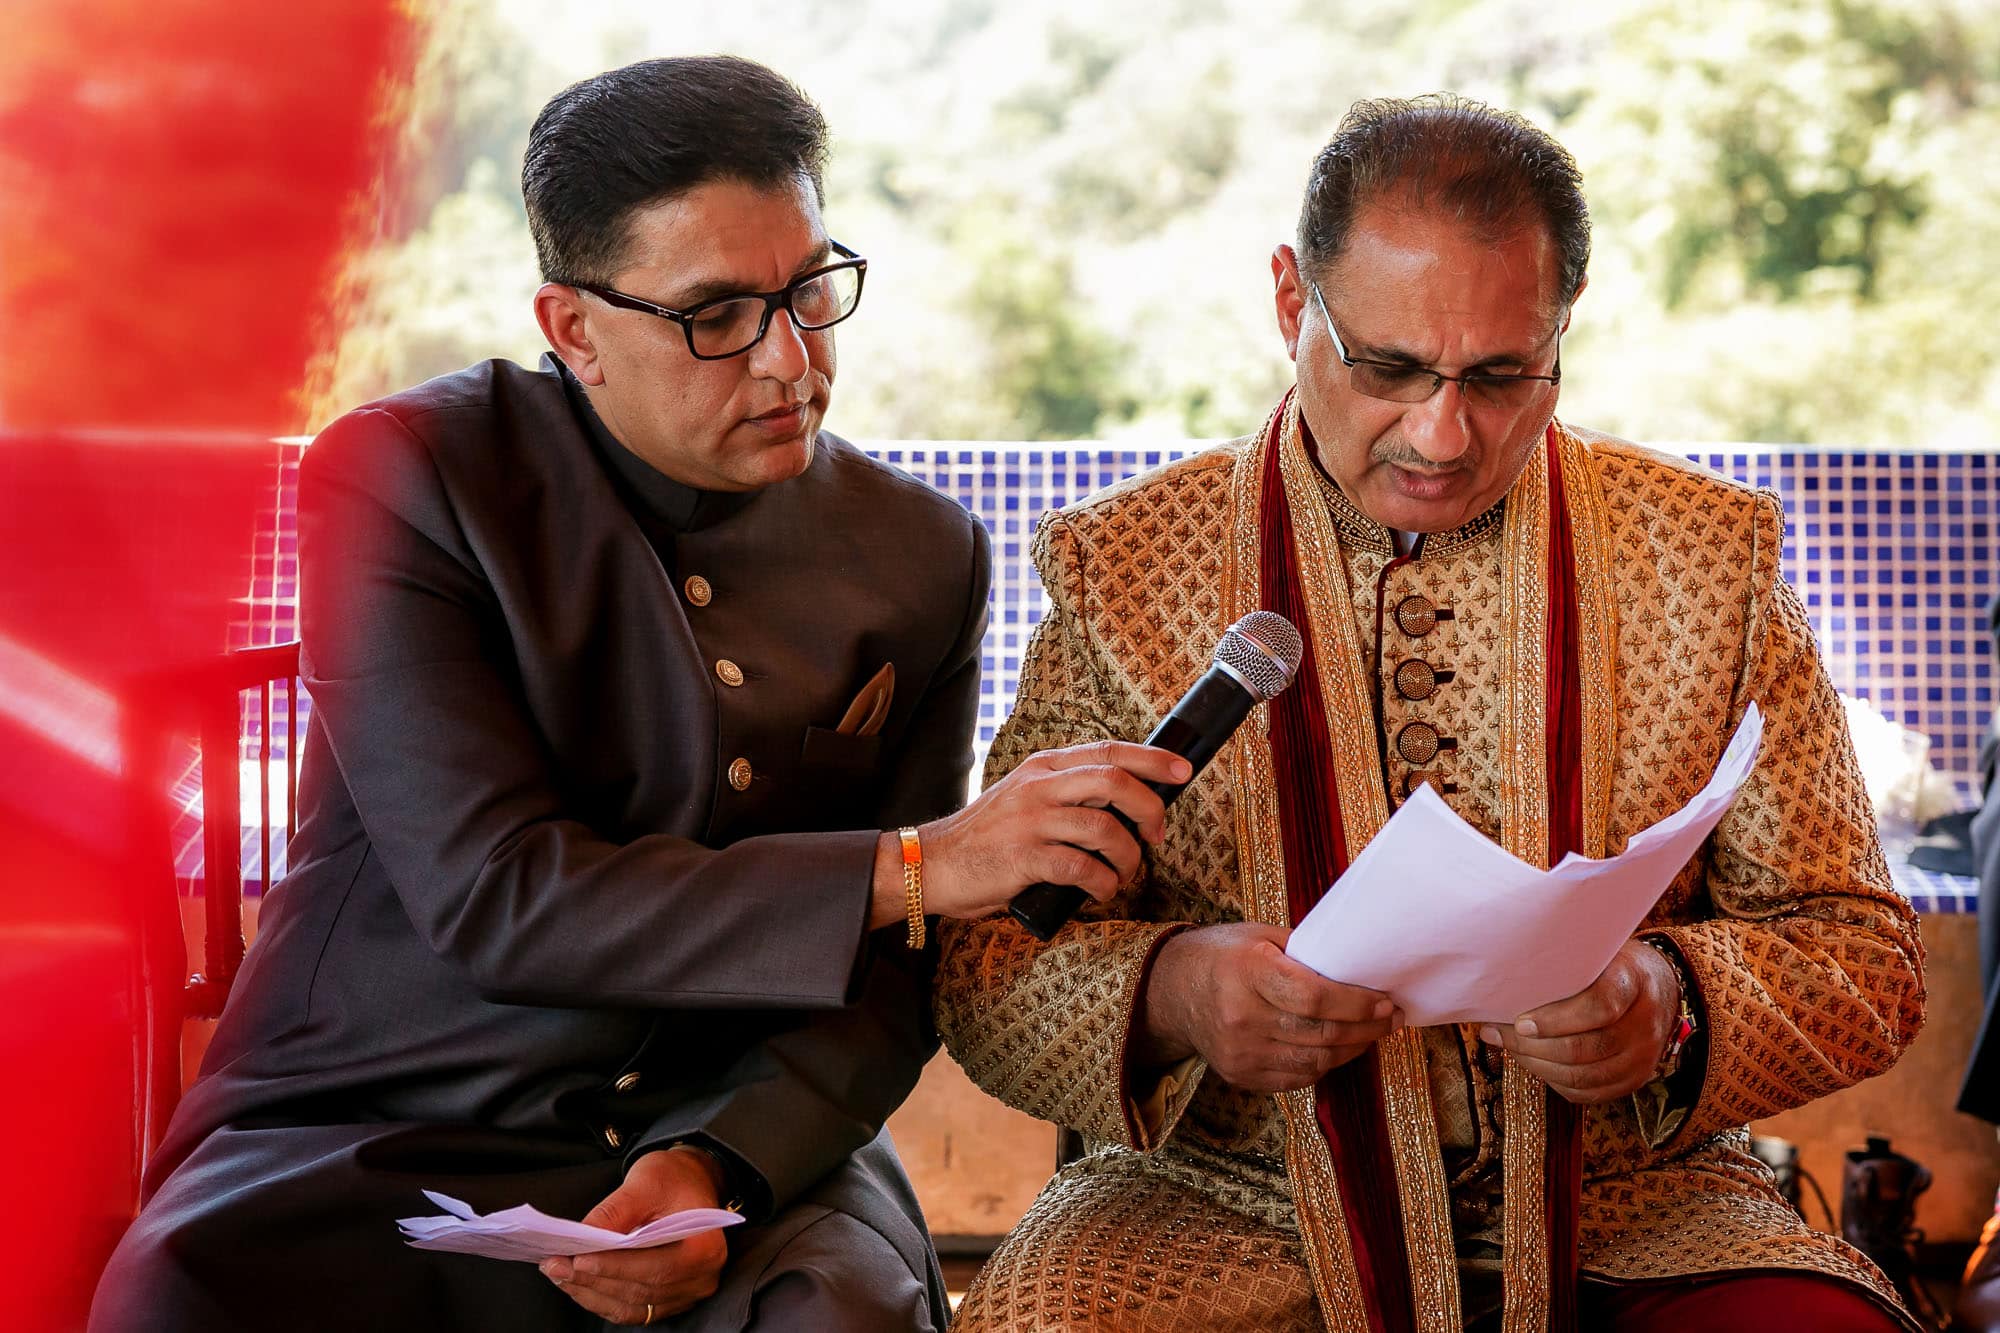 Reading as part of the groom's Muslim tradition